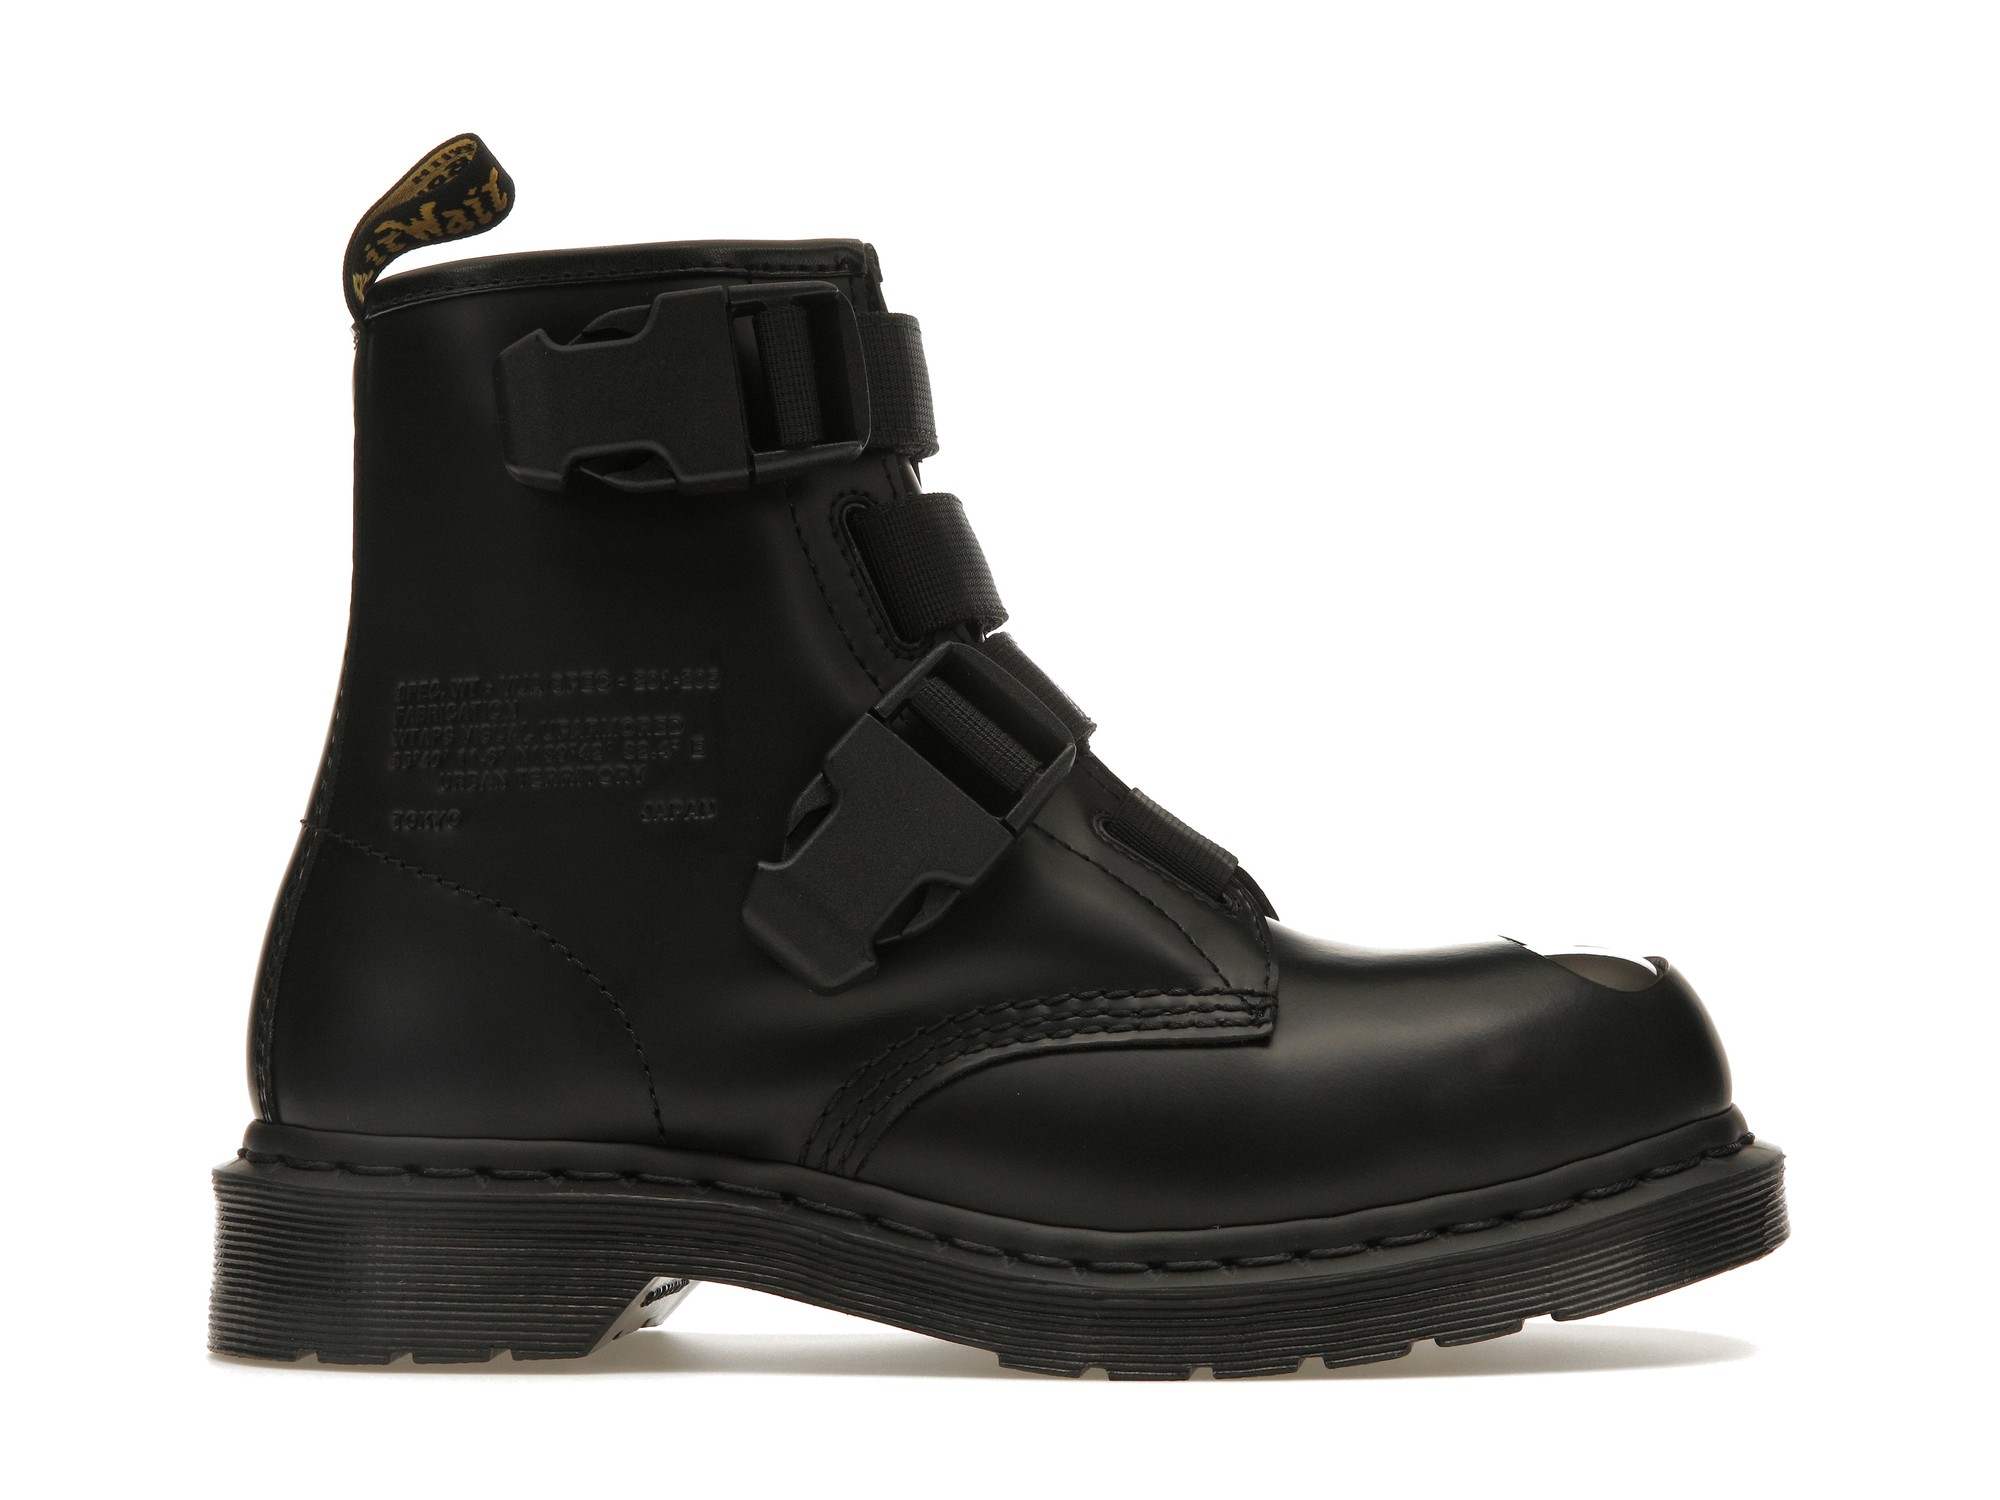 DR. MARTENS X WTAPS 1460 REMASTERED BOOT - ブーツ